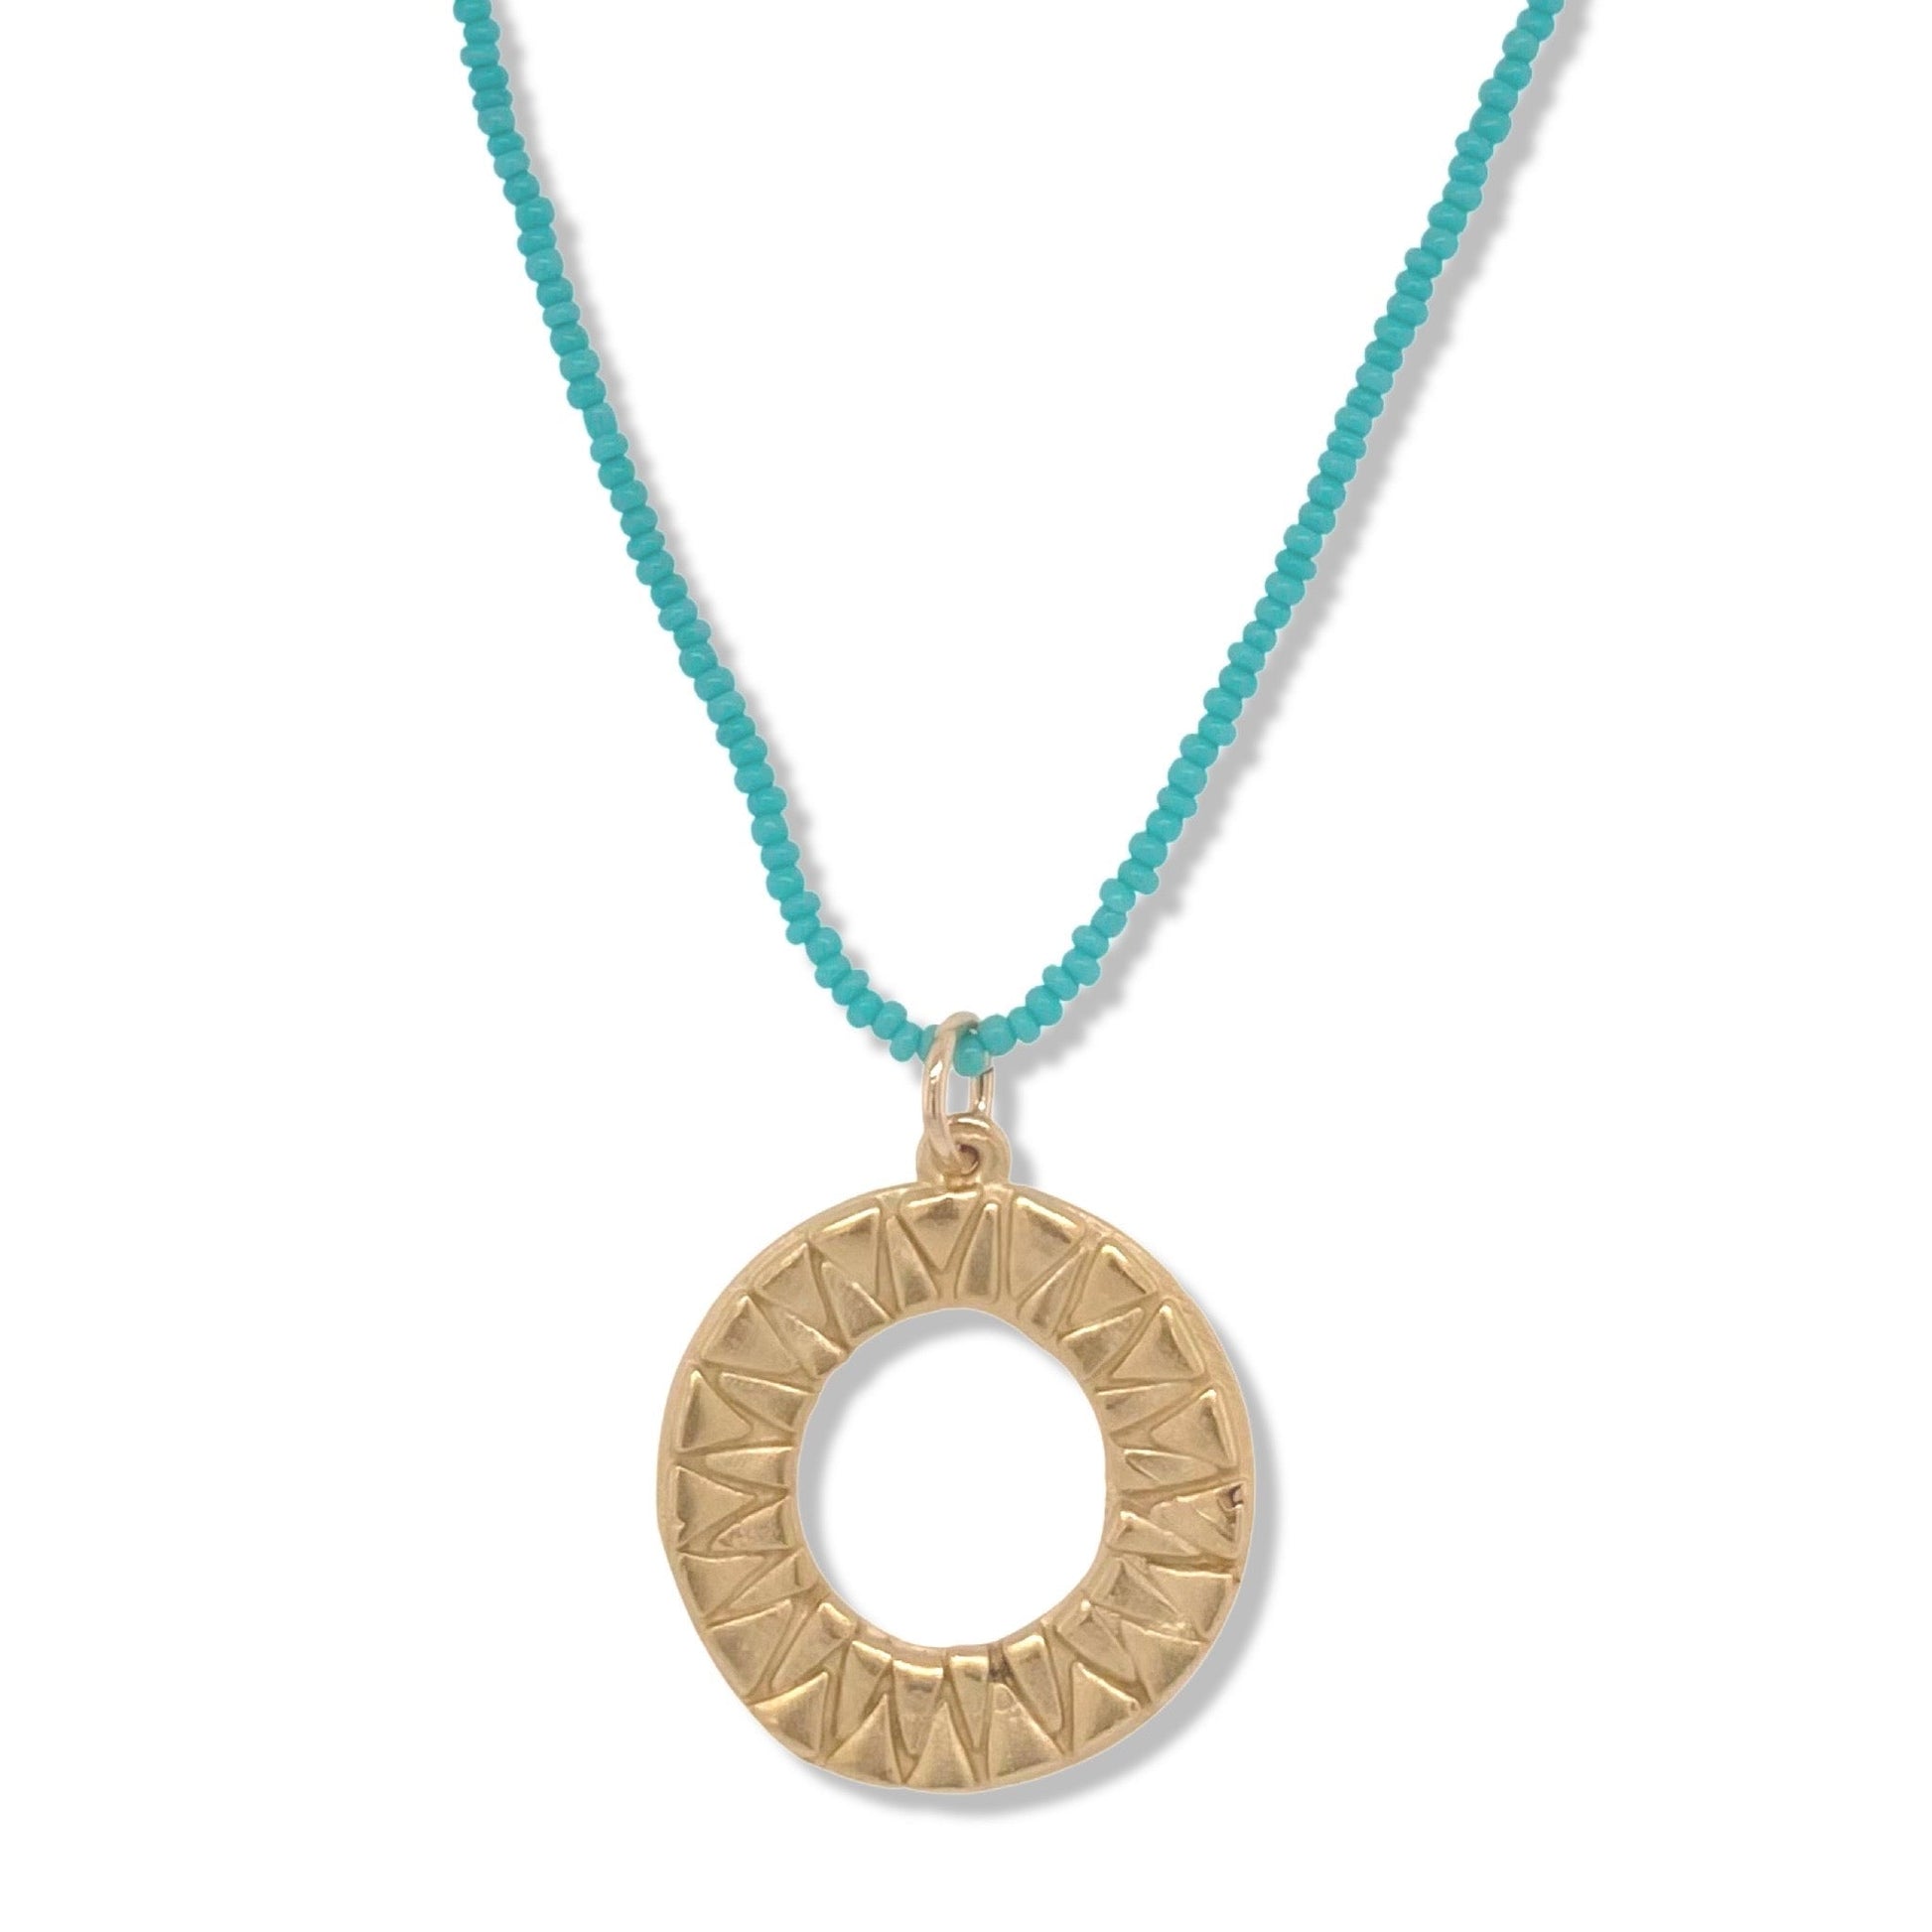 TRIBAL LOOP NECKLACE IN TURQUOISE BY NALU | NANTUCKET